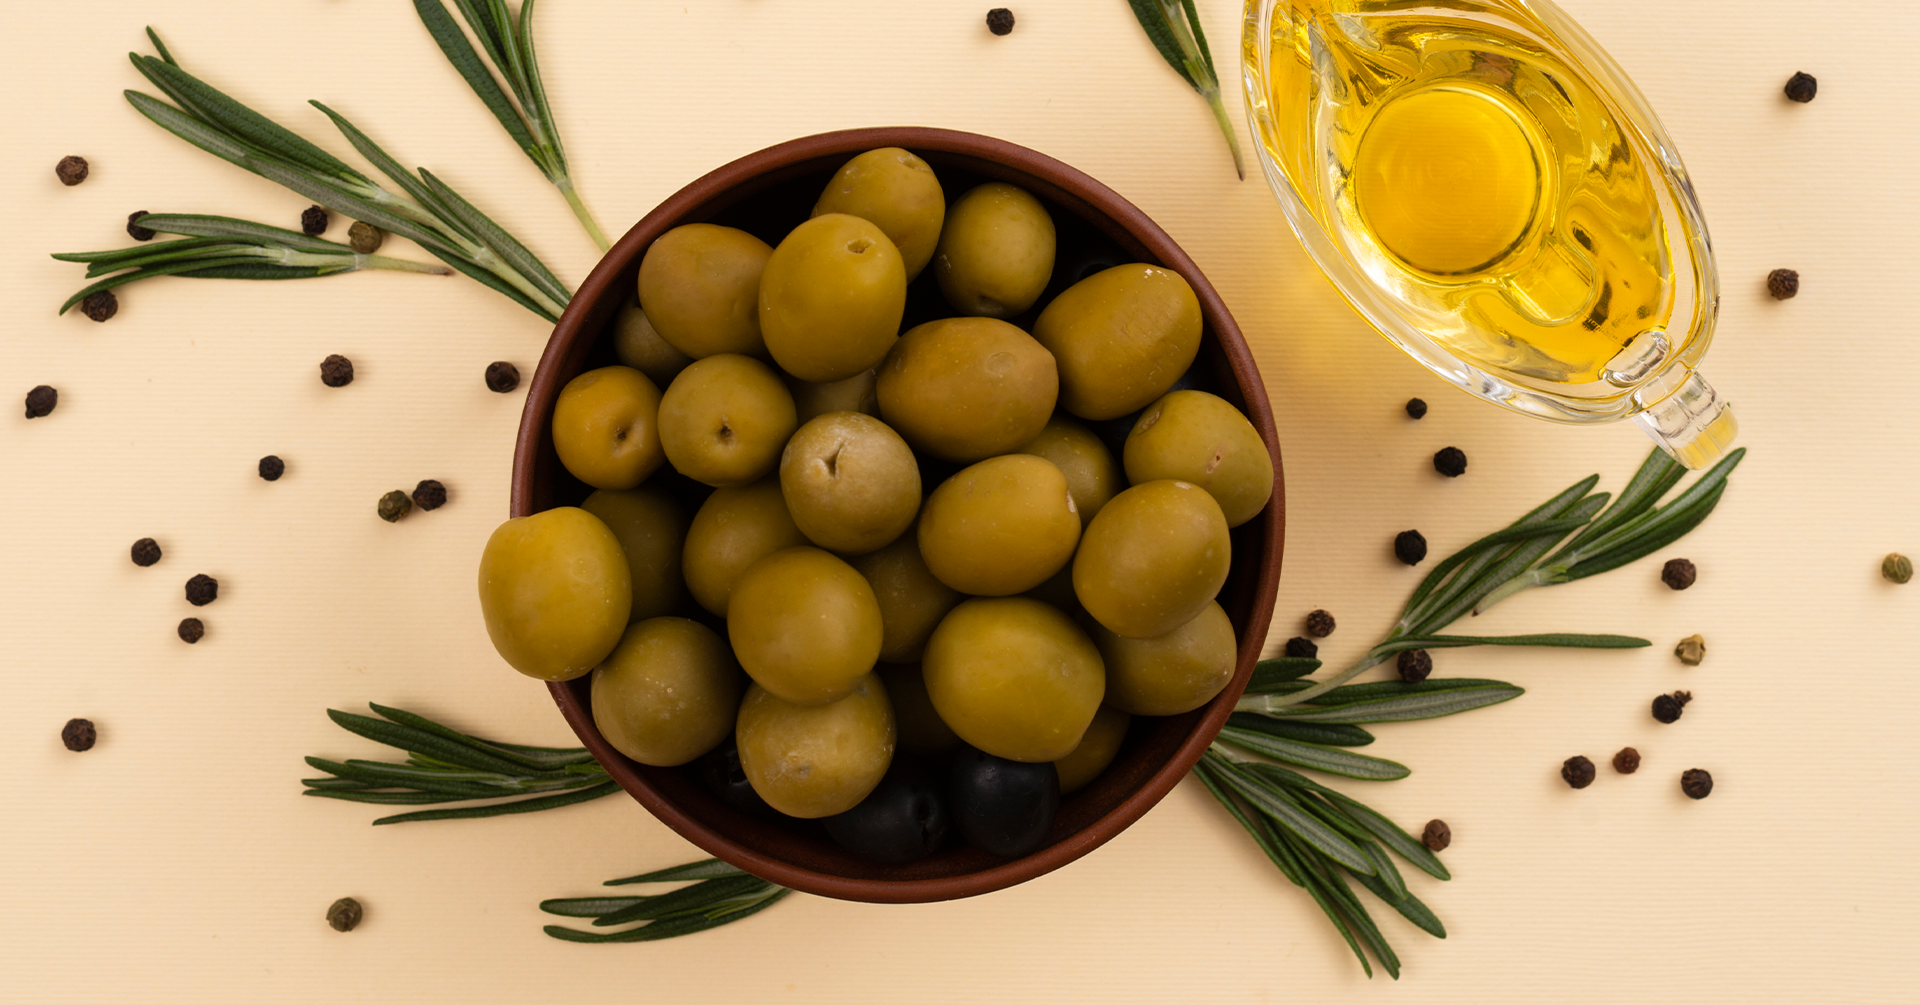 11-Health-benefits-and-side-effects-of-olives-benefits-of-olives